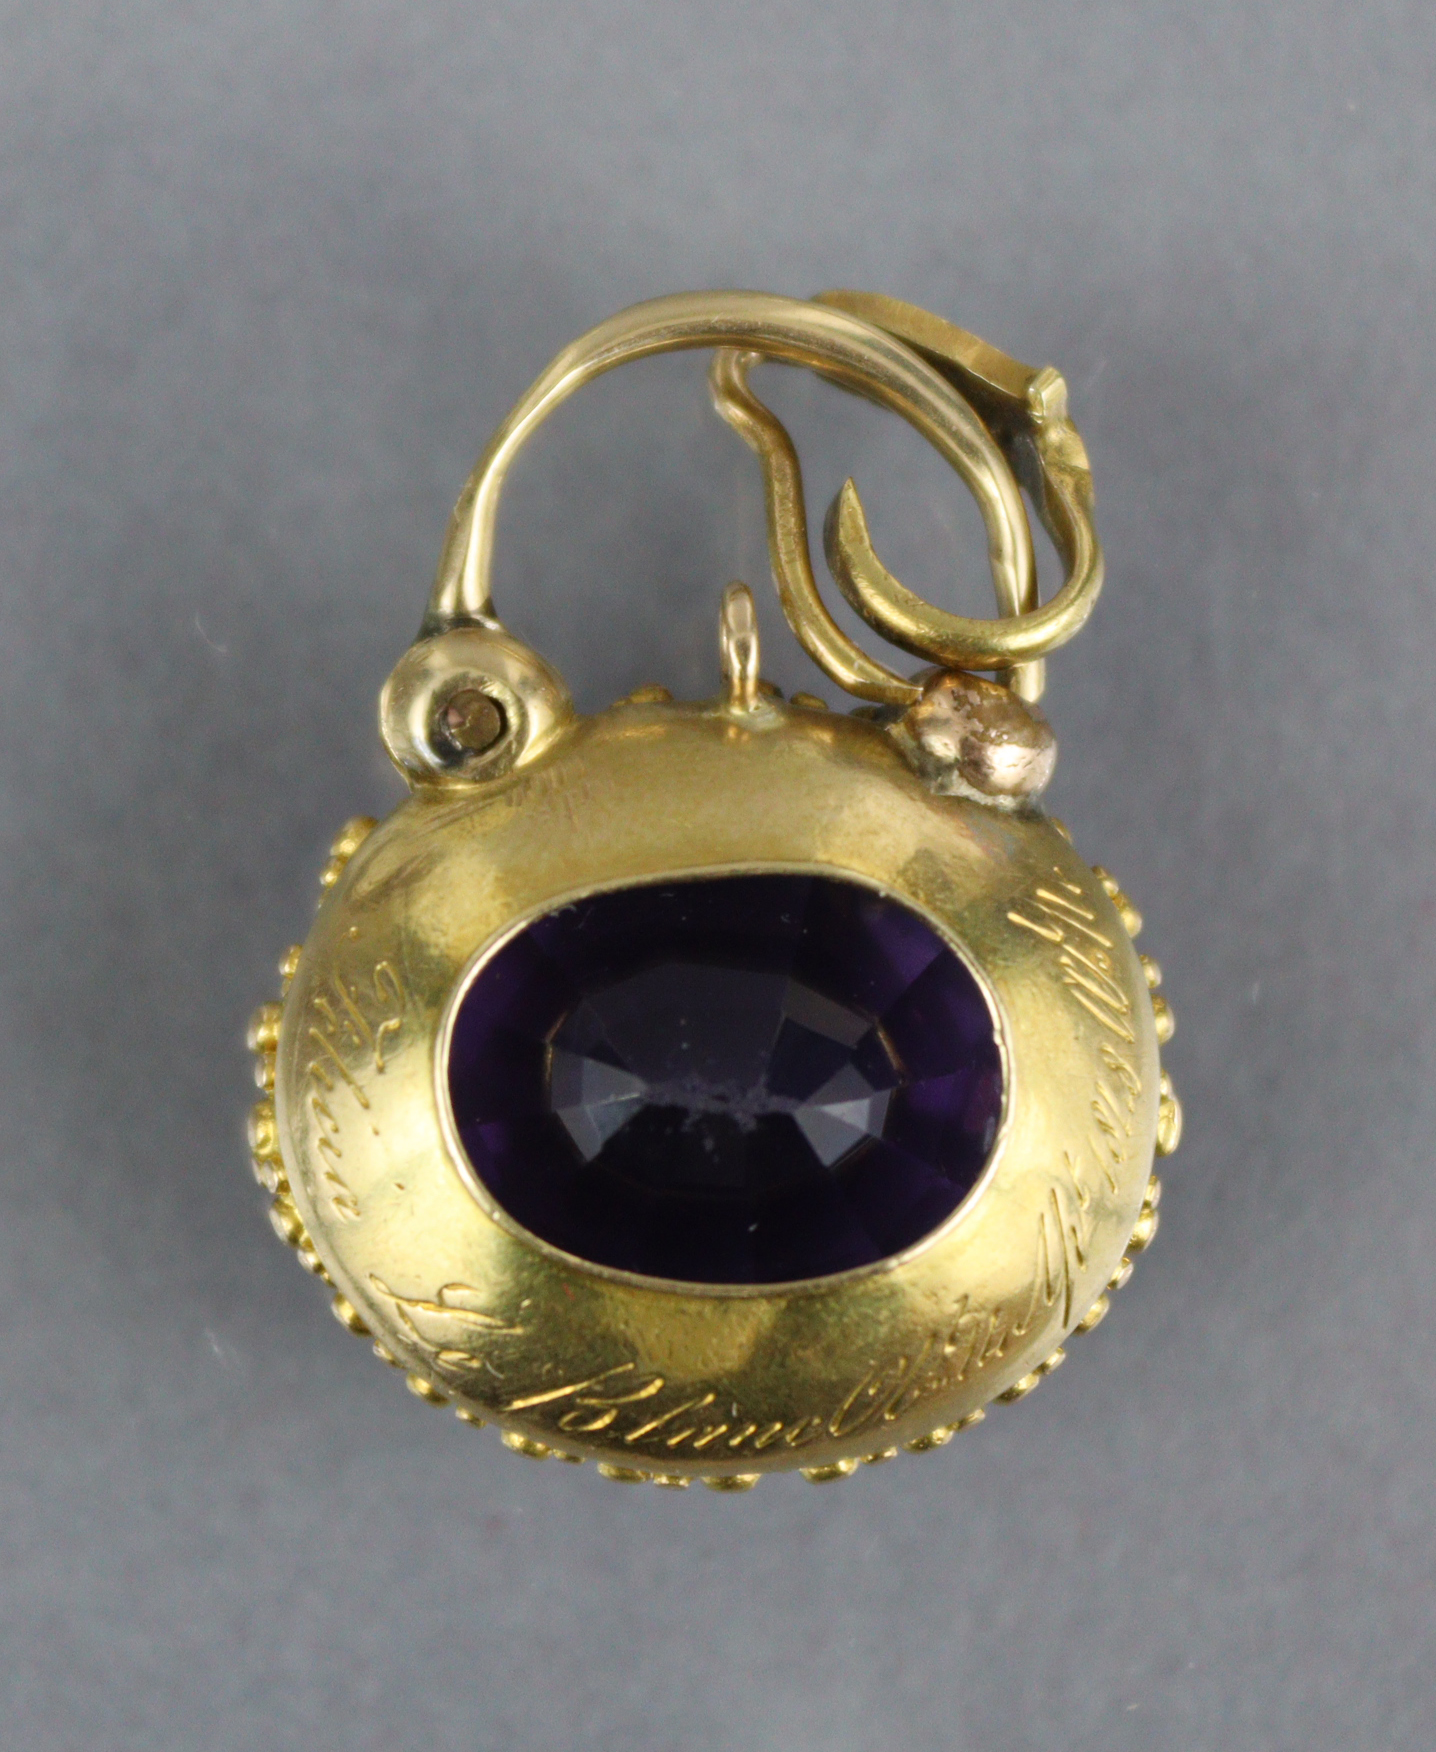 A Victorian amethyst pendant, the oval stone measuring approx. 18mm x 15mm x 9mm, set within a - Image 3 of 3